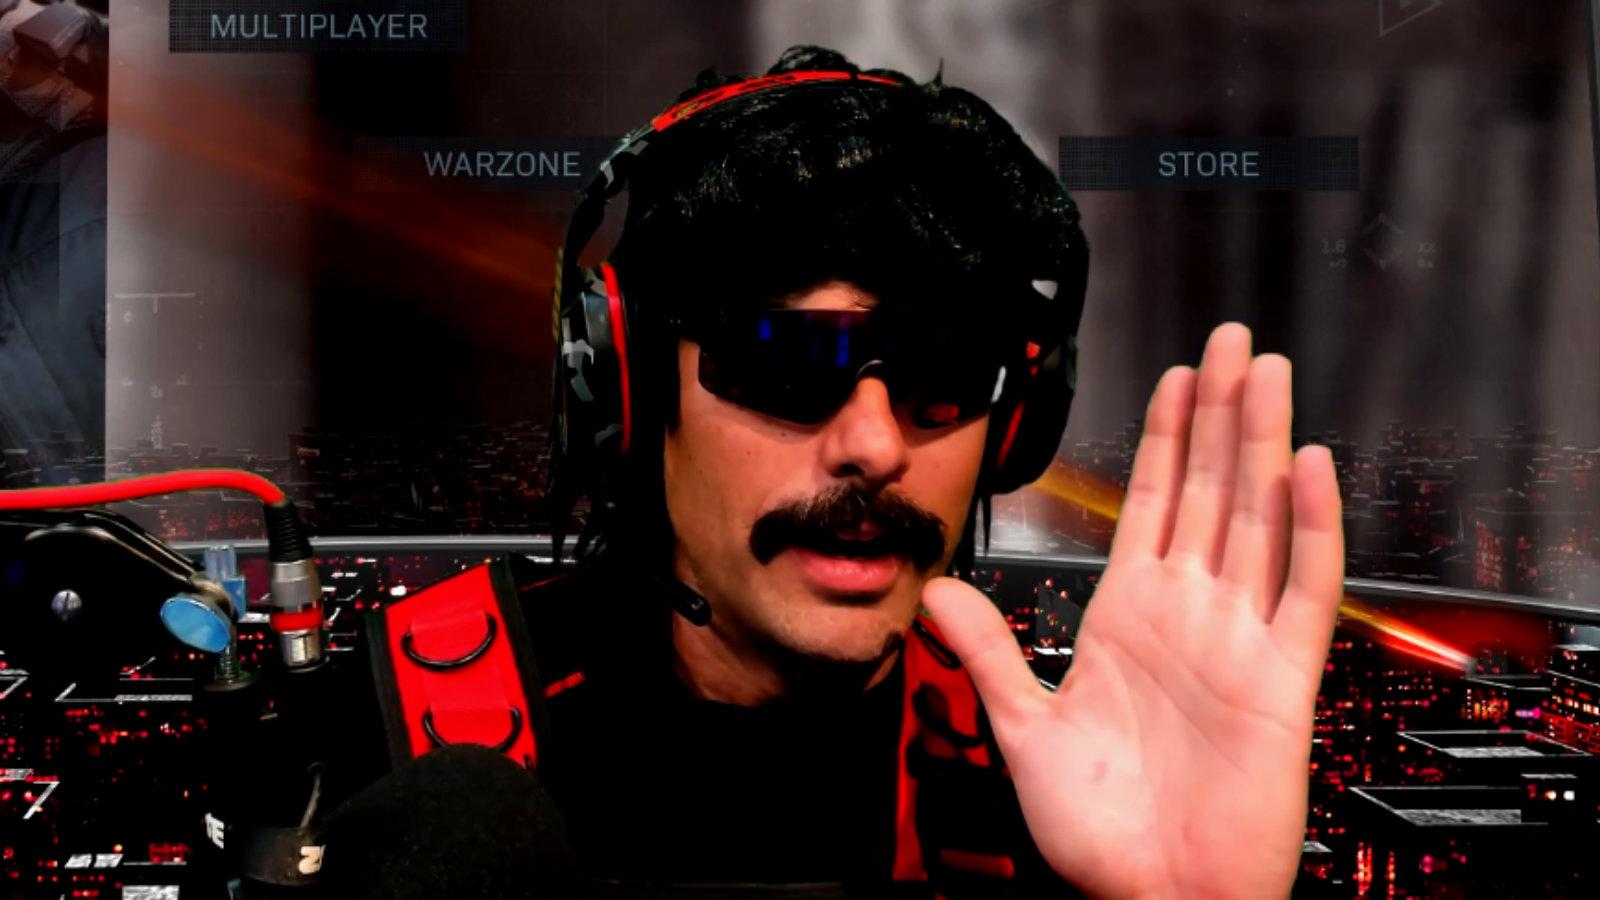 Dr Disrespect on Twitch